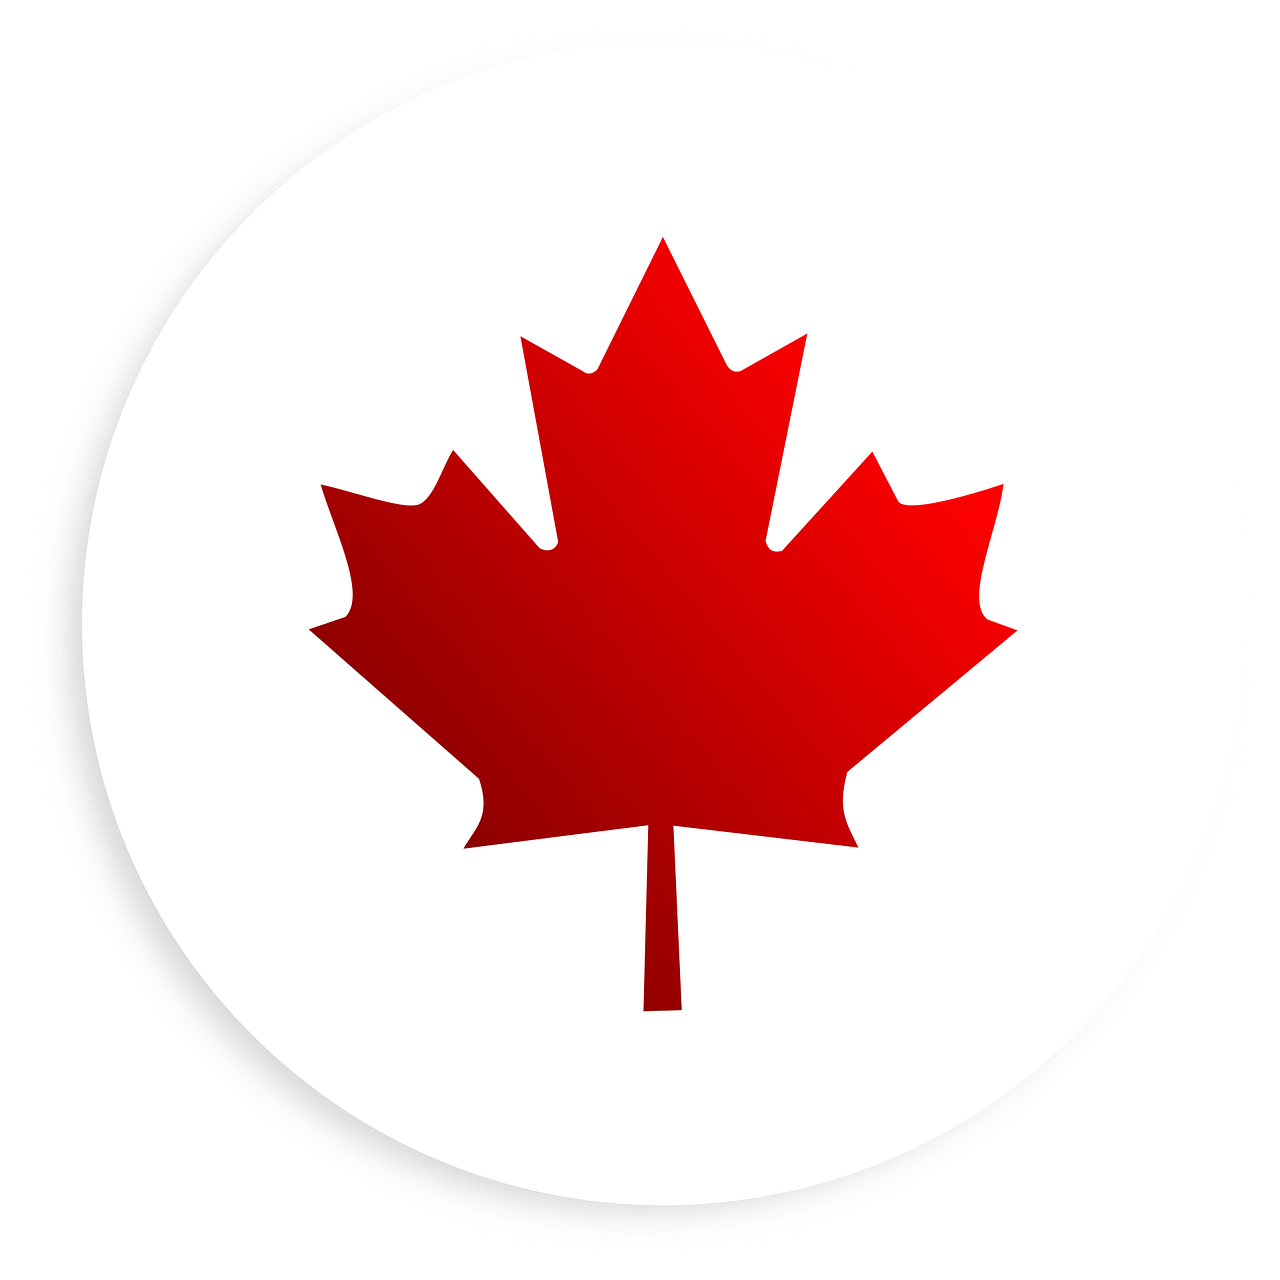 Image of a red maple leaf graphic on a white background.